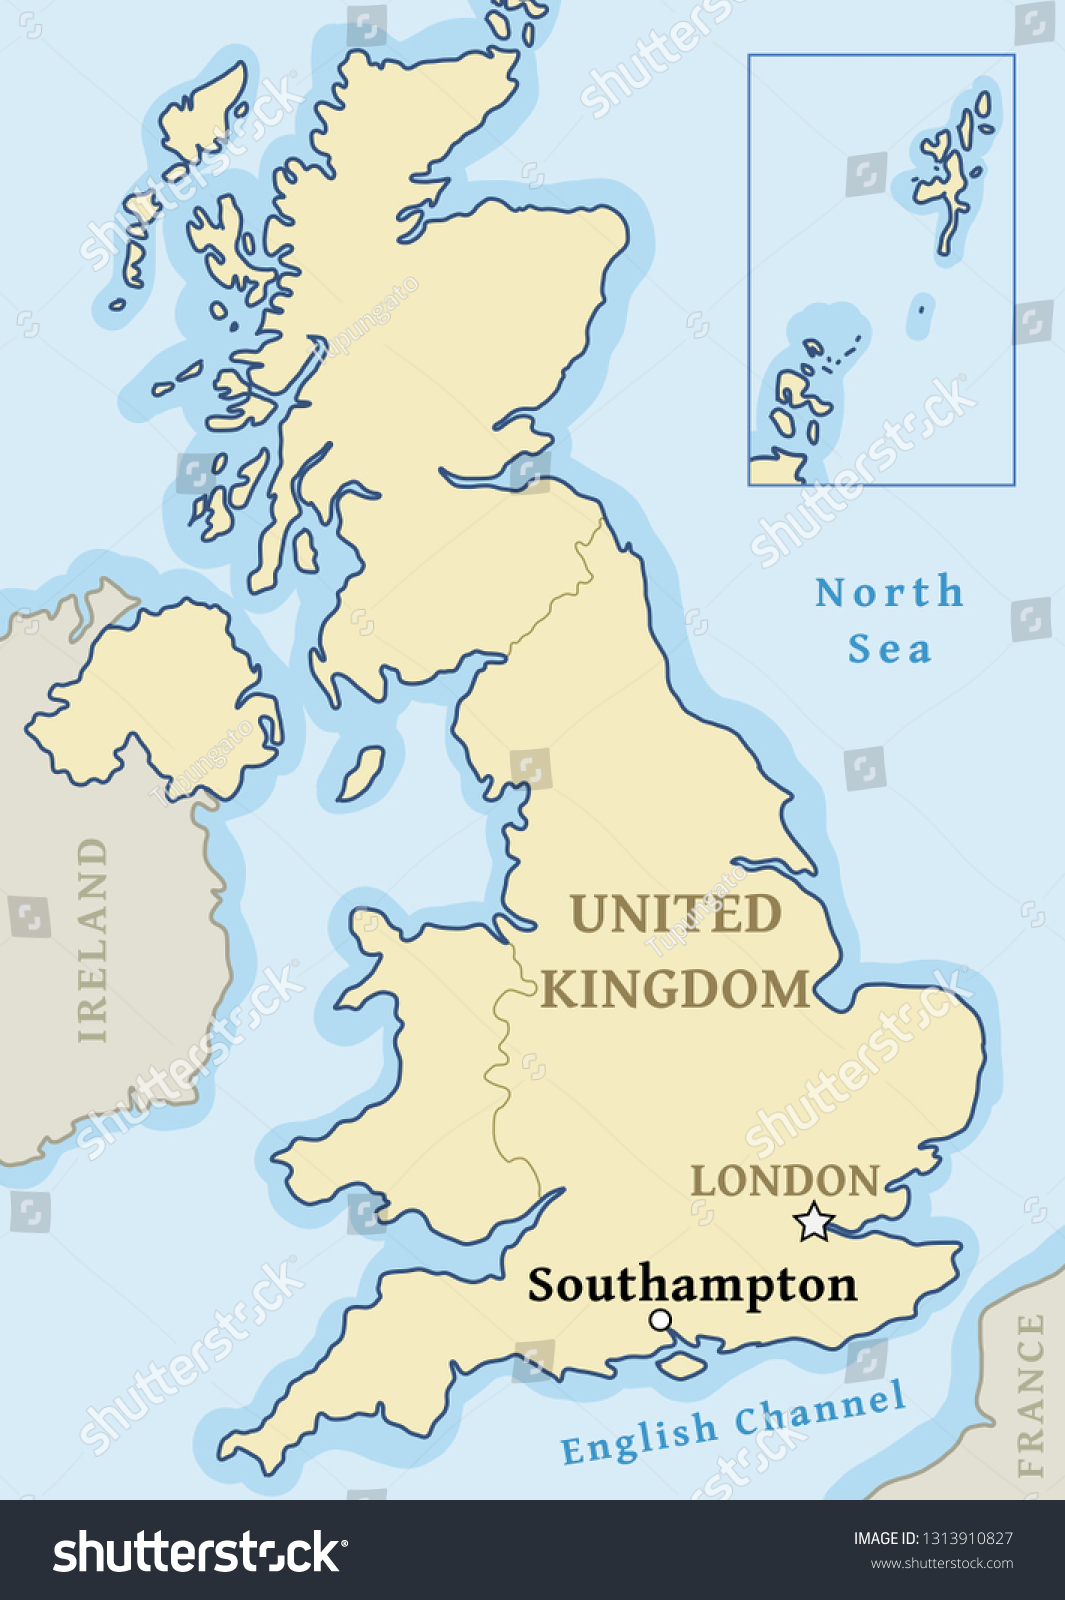 Southampton On A Map Southampton Map Location City Marked United Stock Vector (Royalty Free)  1313910827 | Shutterstock